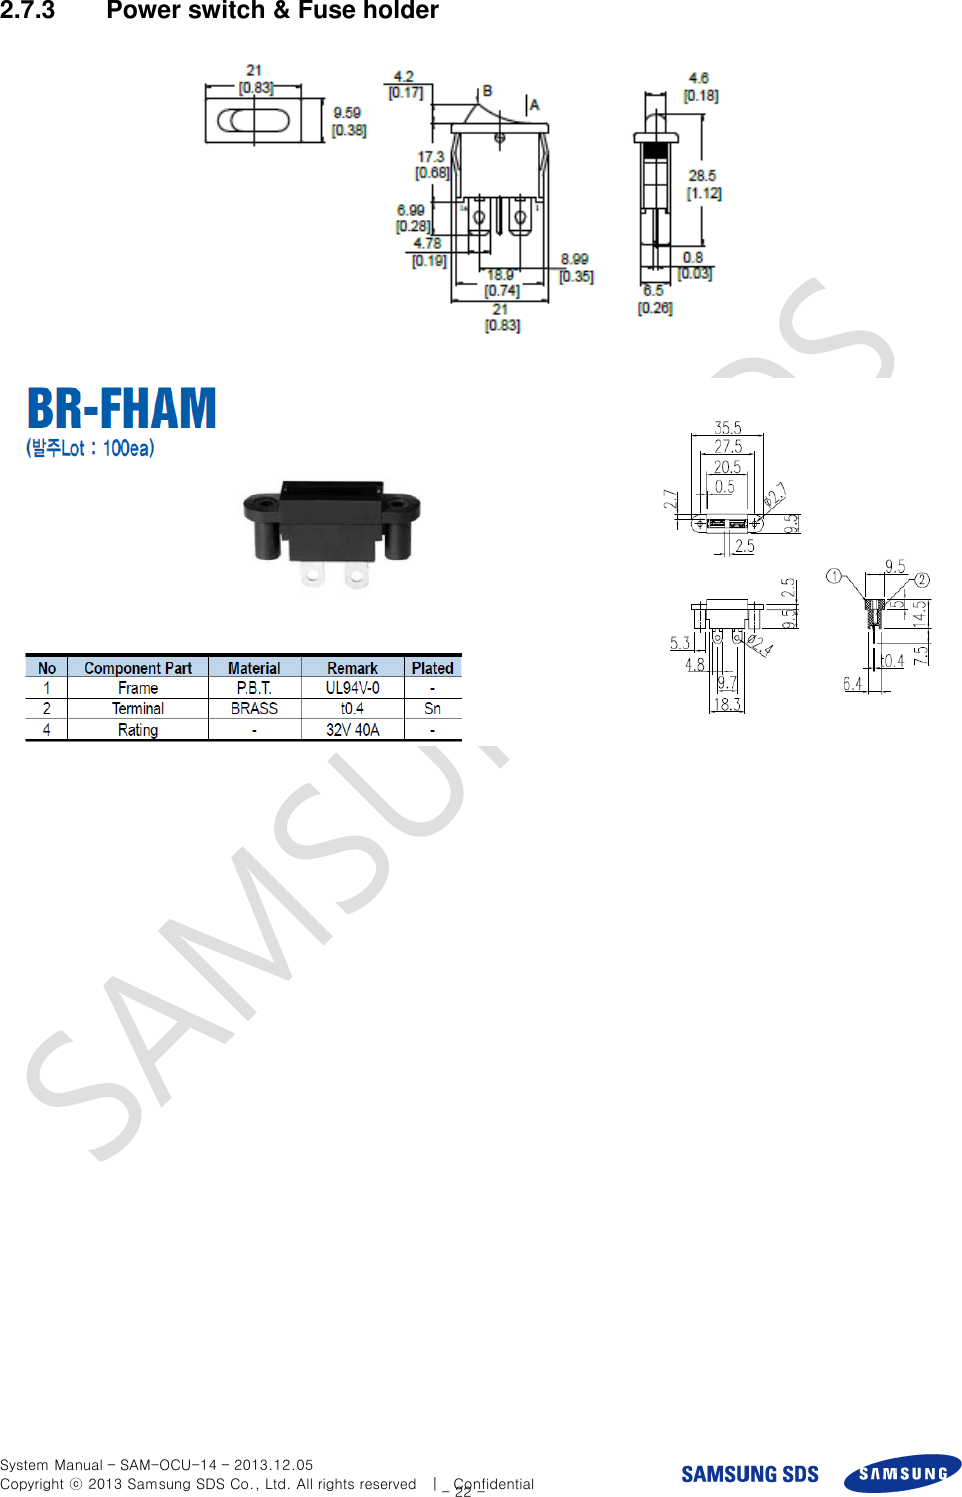  System Manual – SAM-OCU-14 – 2013.12.05 Copyright ⓒ 2013 Samsung SDS Co., Ltd. All rights reserved    |    Confidential - 22 - 2.7.3  Power switch &amp; Fuse holder   